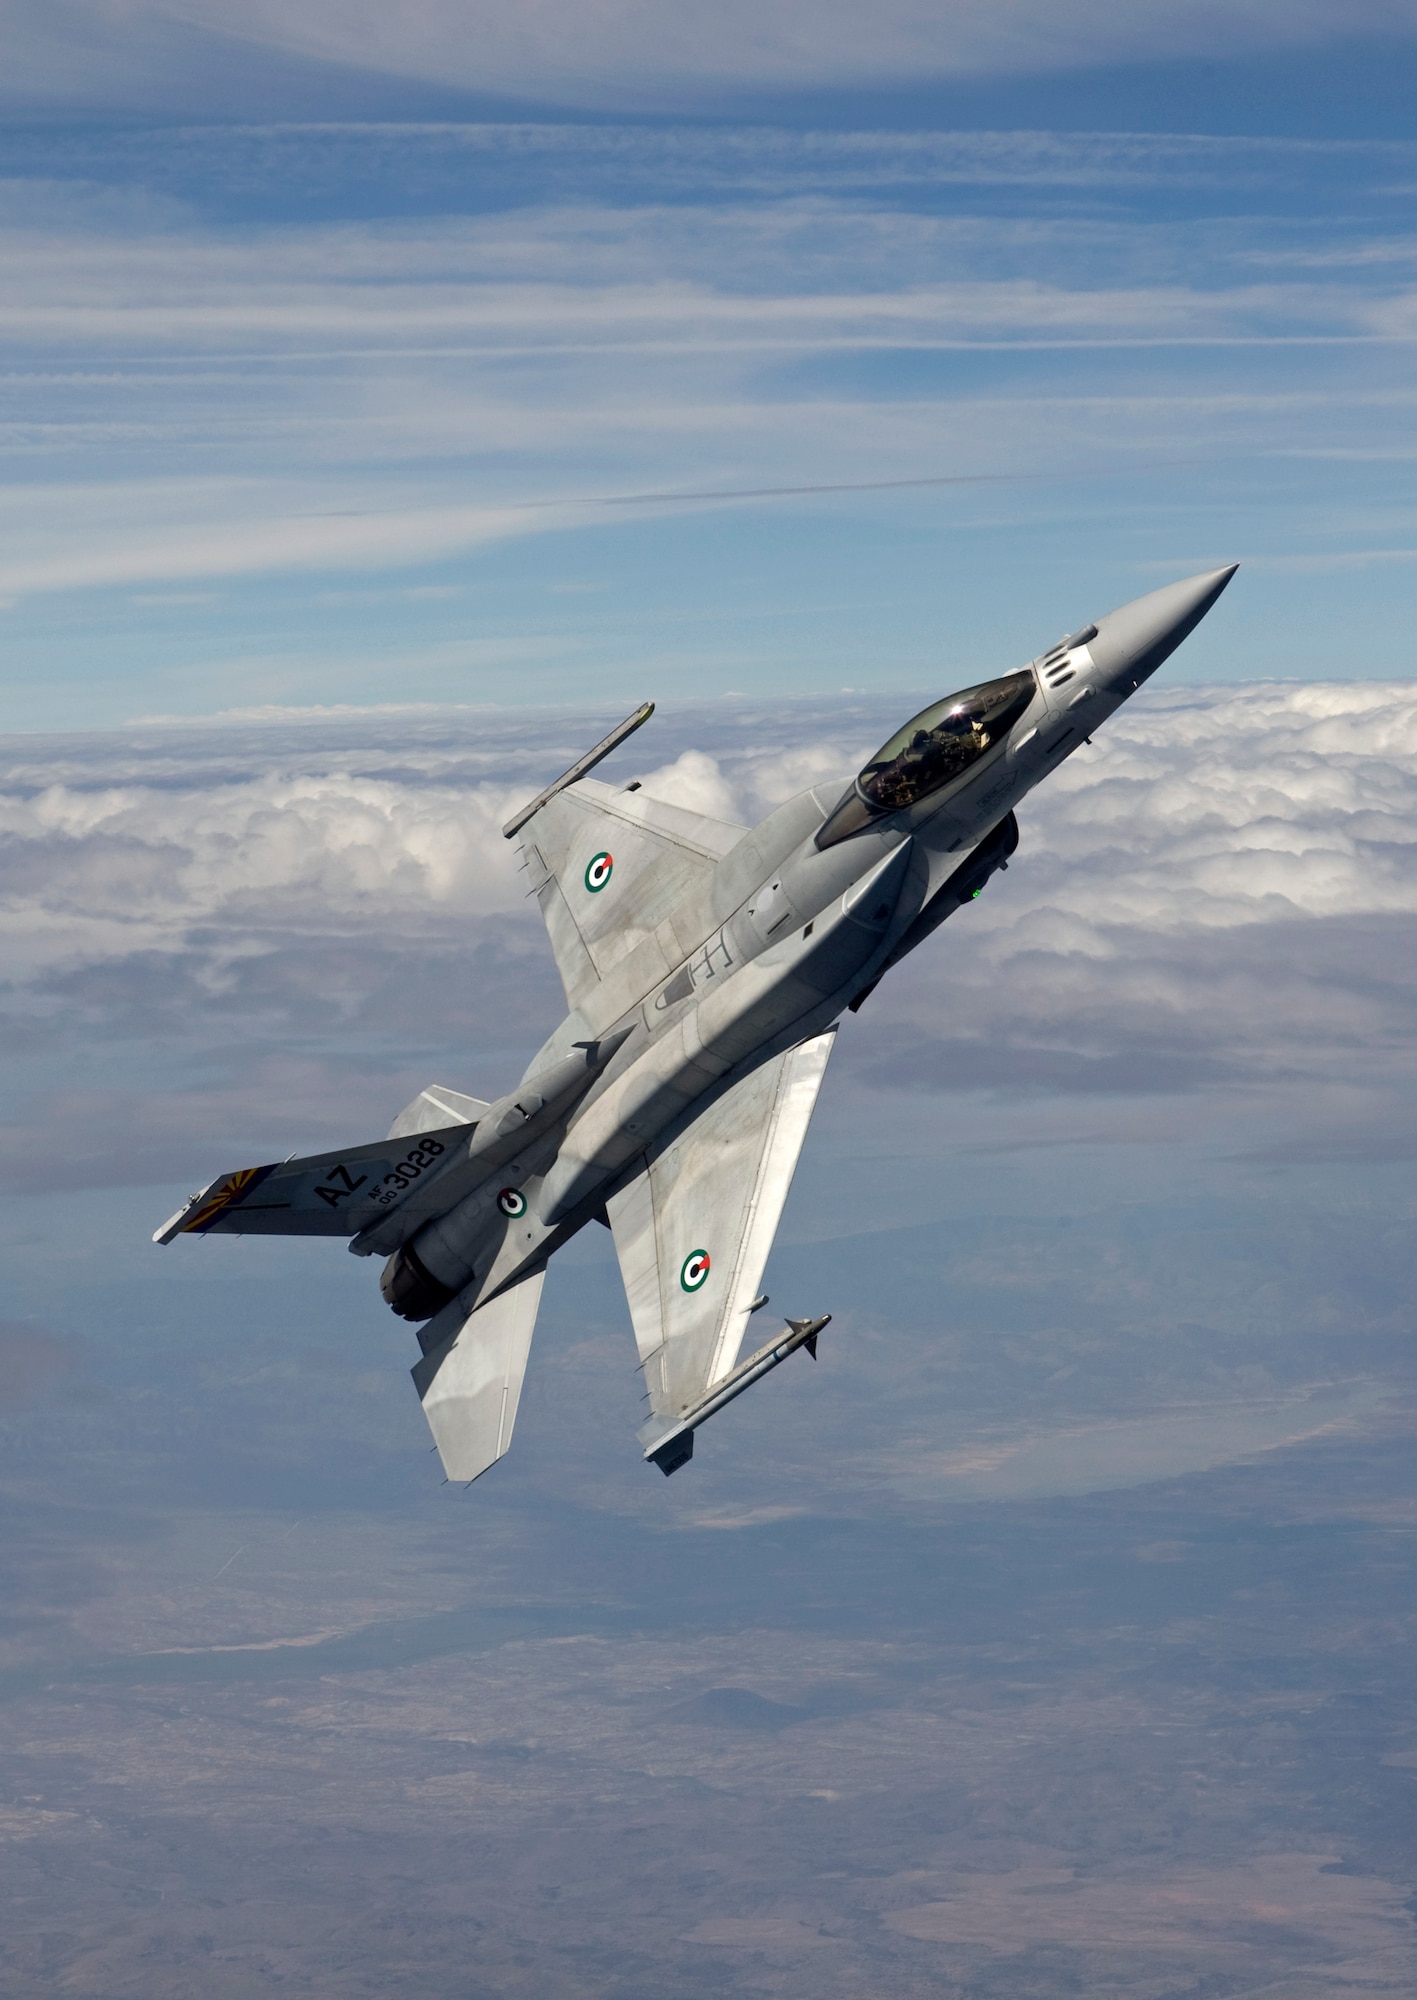 A United Arab Emirates F-16E Desert Falcon, block 60, flies over Southern Arizona Aug. 11 before heading to the country’s first Red Flag at Nellis Air Force Base, Nev. The 162nd Fighter Wing at Tucson International Airport maintains and operates a squadron of block 60s for the purpose of training the U.A.E. Air Force in the advanced multi-role fighter. (Photo by James Haseltine, HIGH-G Productions)